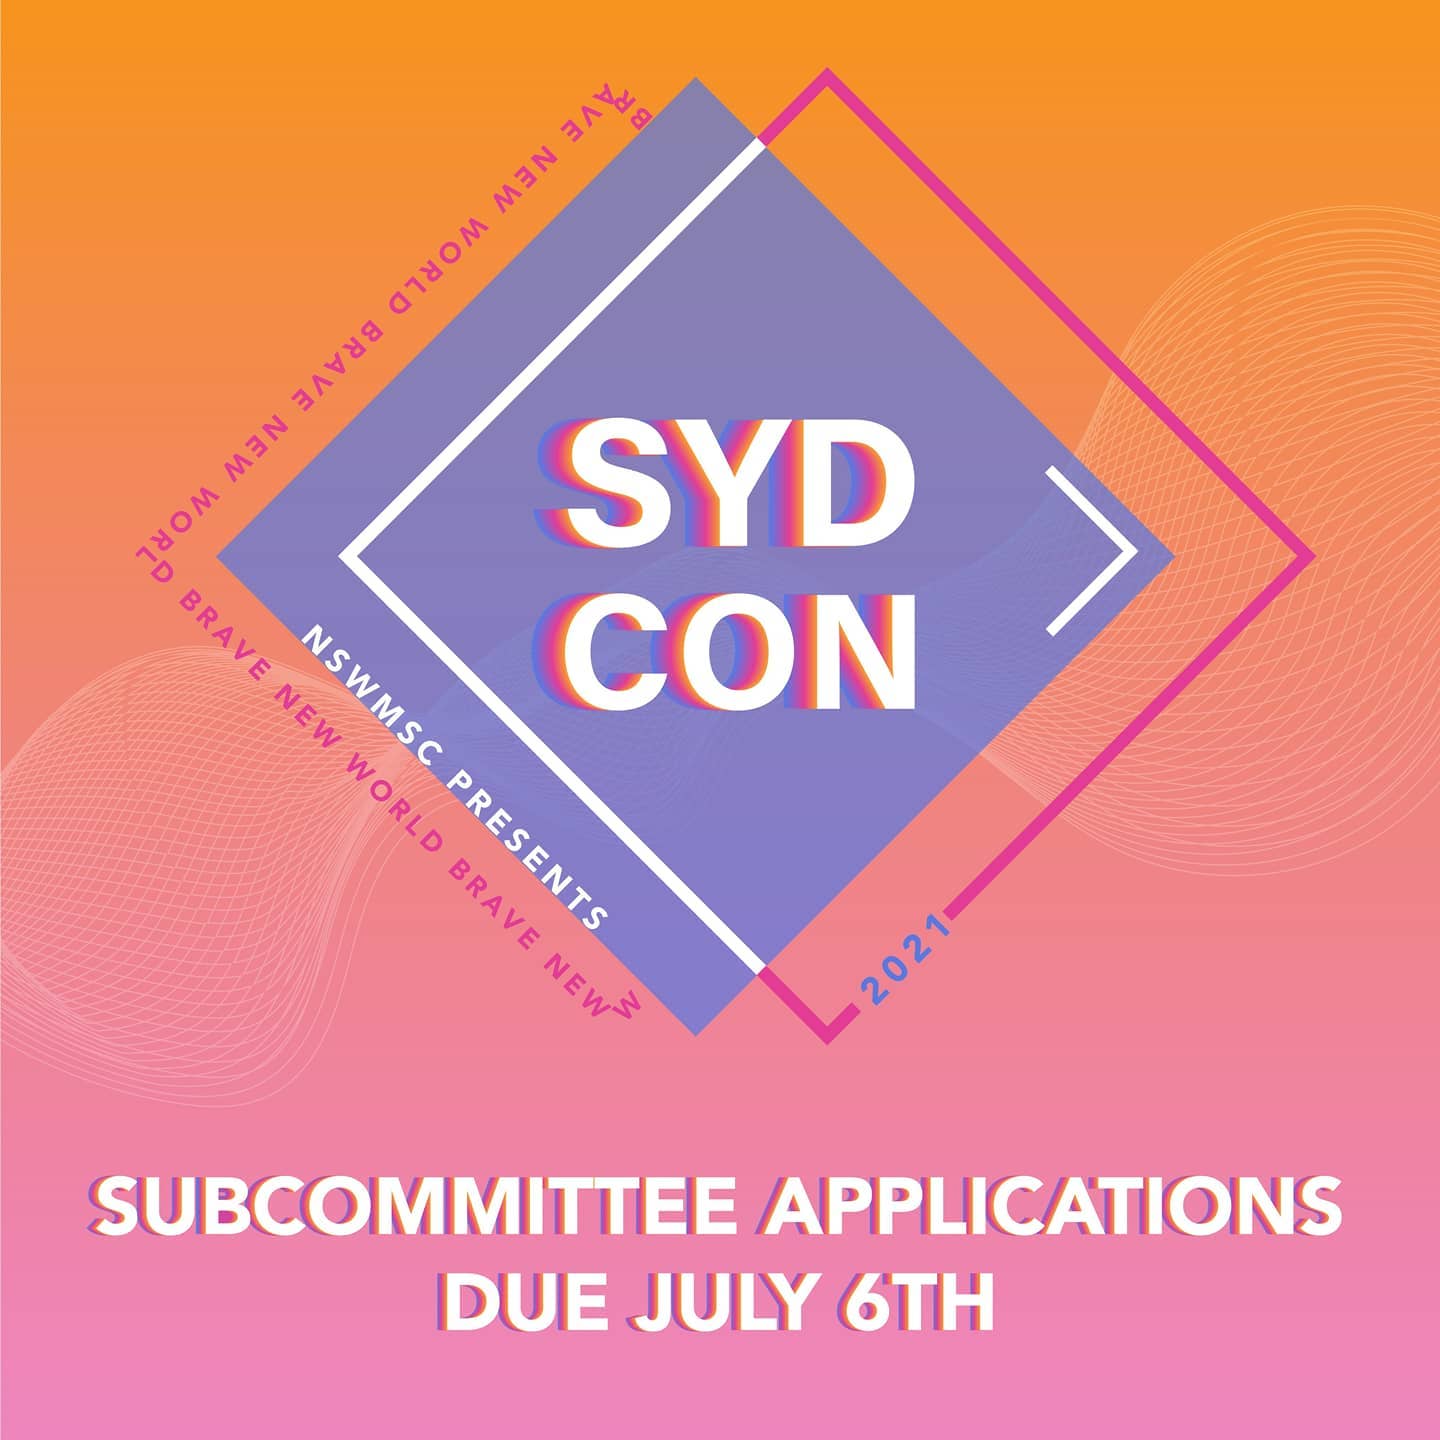 ✨SYDCON21 APPLICATIONS DUE JULY 6TH✨

The applications are flowing in - use that lockdown boredom to join our team for what's shaping up to be the event of the year😎

APPLY NOW: https://www.nswmsc.org.au/subcommittee-applications/ (link also in bio)

Positions available:
-Socials💃
-Academics📖 
-Creatives🎨
-Emergency Medical Challenge🚑

Join our journey to a #BraveNewWorld